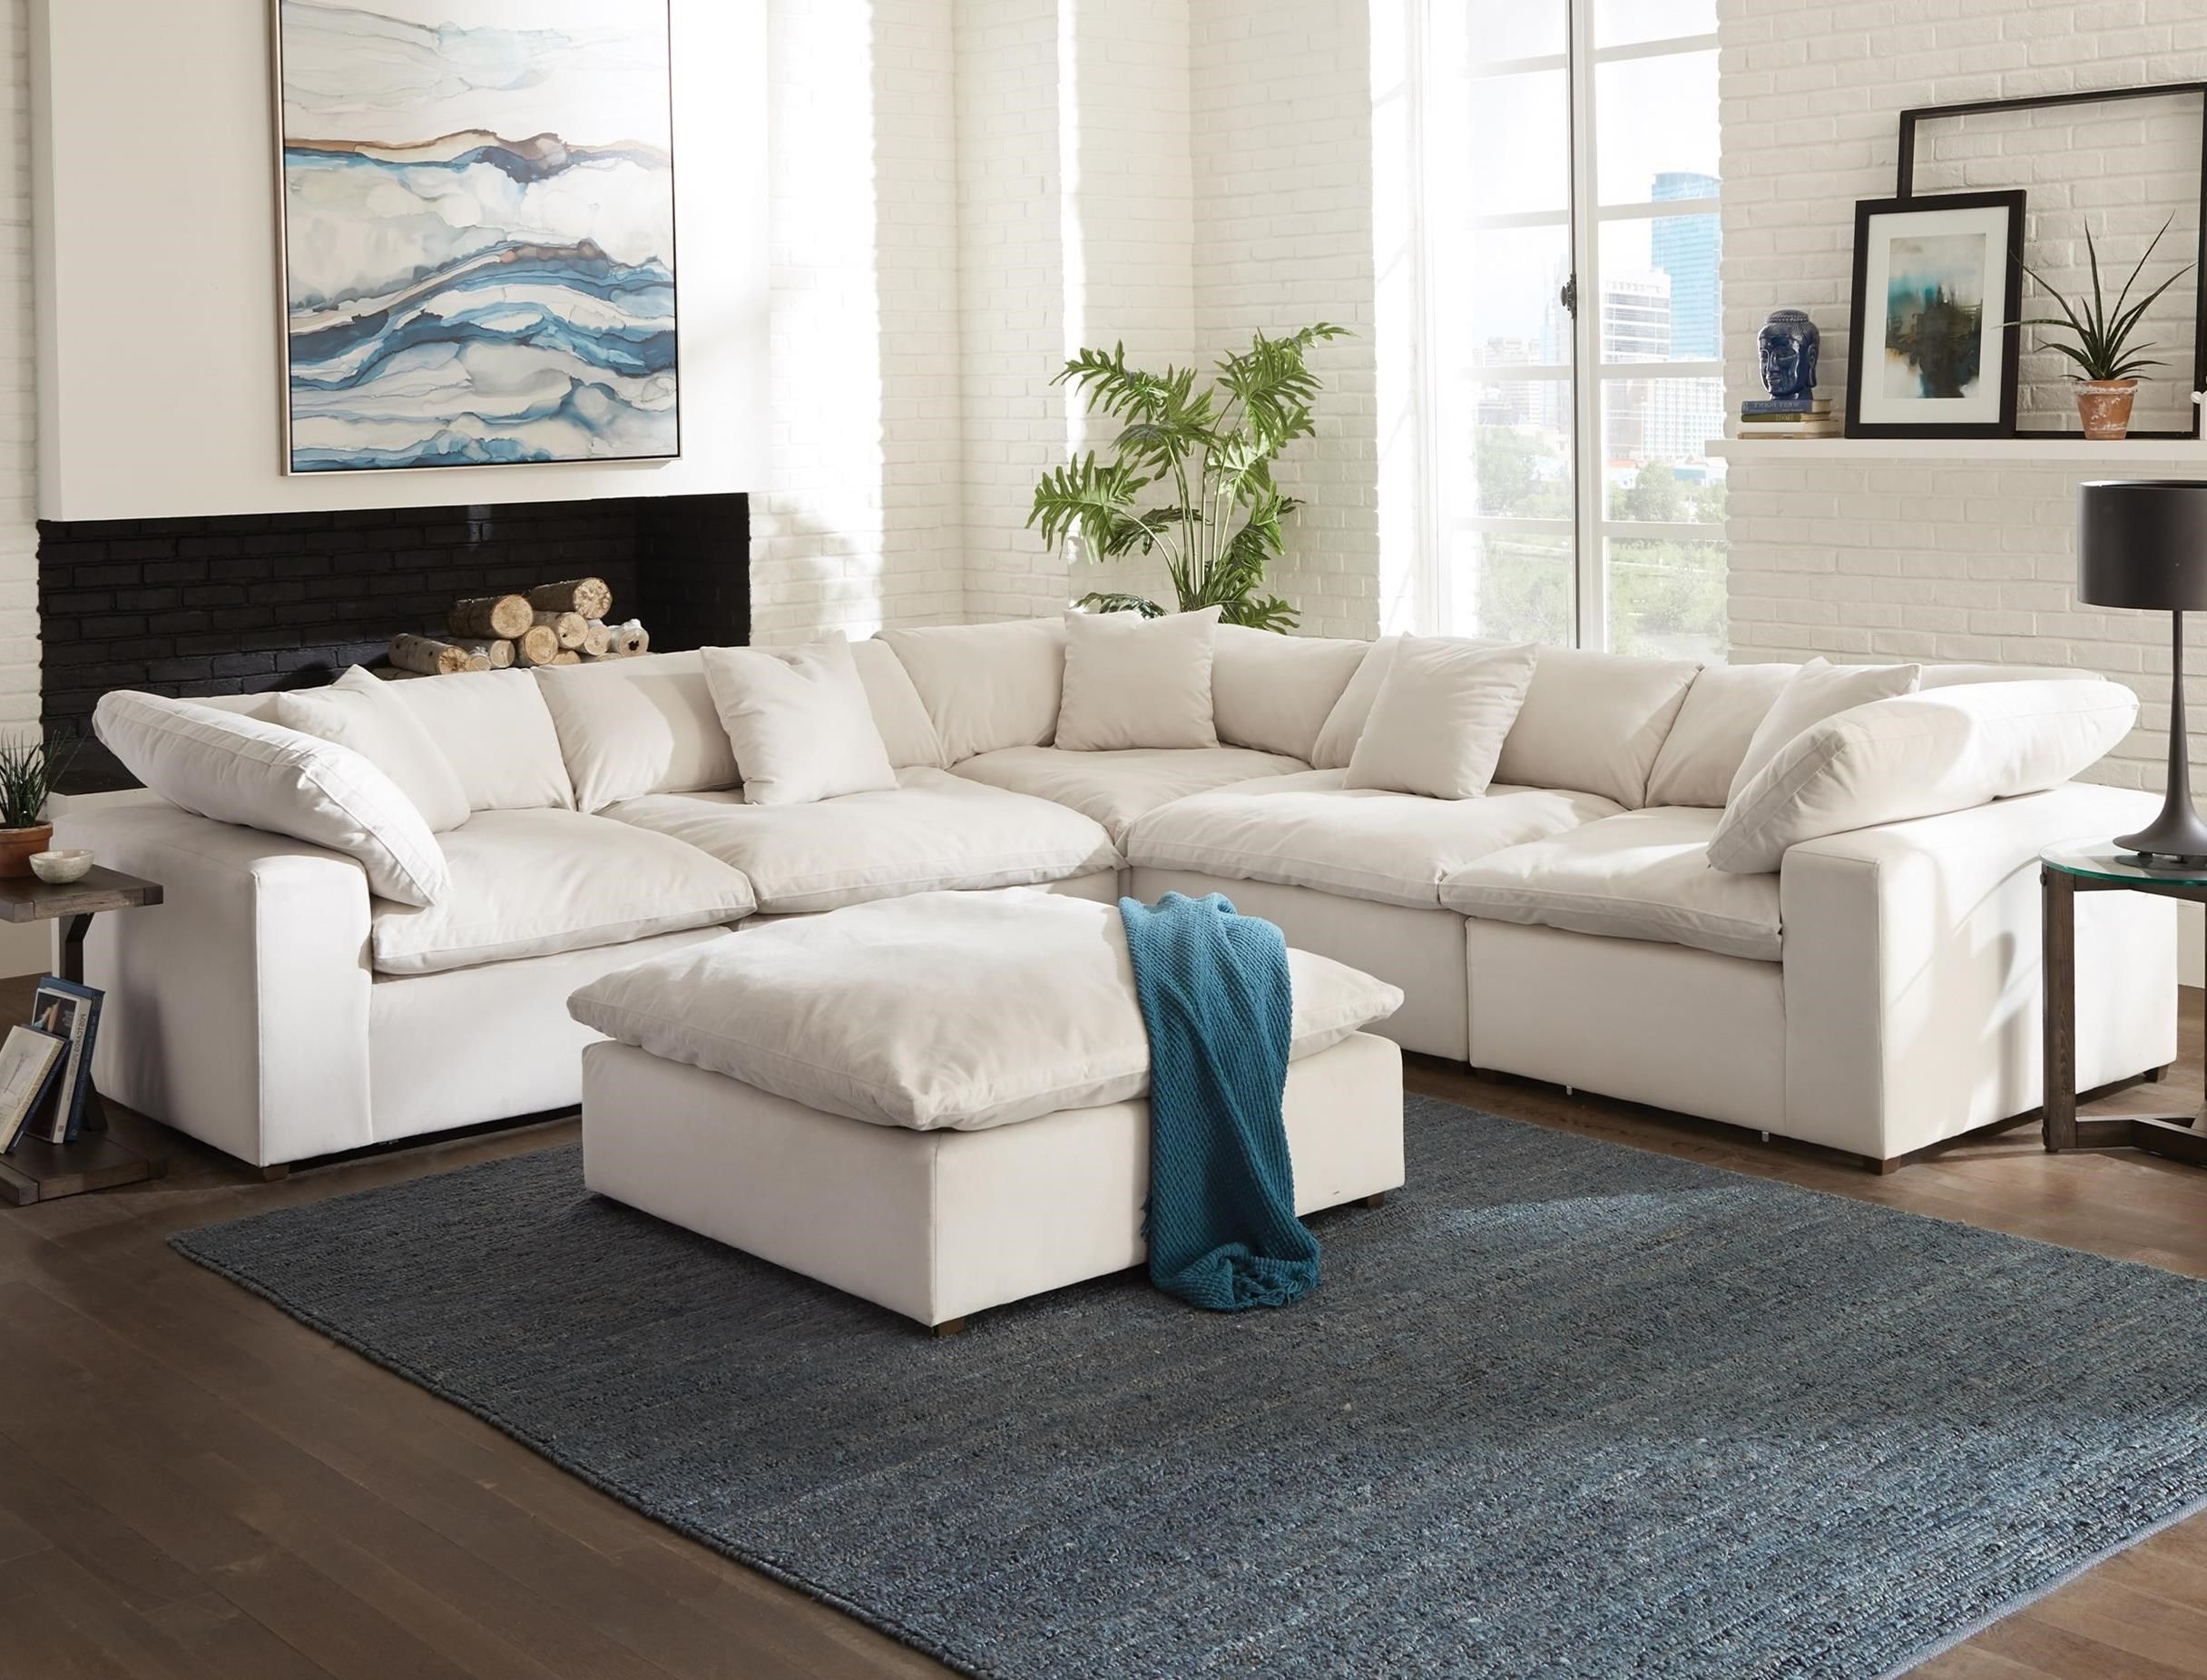 Jackson Furniture Posh Contemporary L Shaped Sectional Sofa | Standard Inside Modern L Shaped Sofa Sectionals (Gallery 14 of 20)